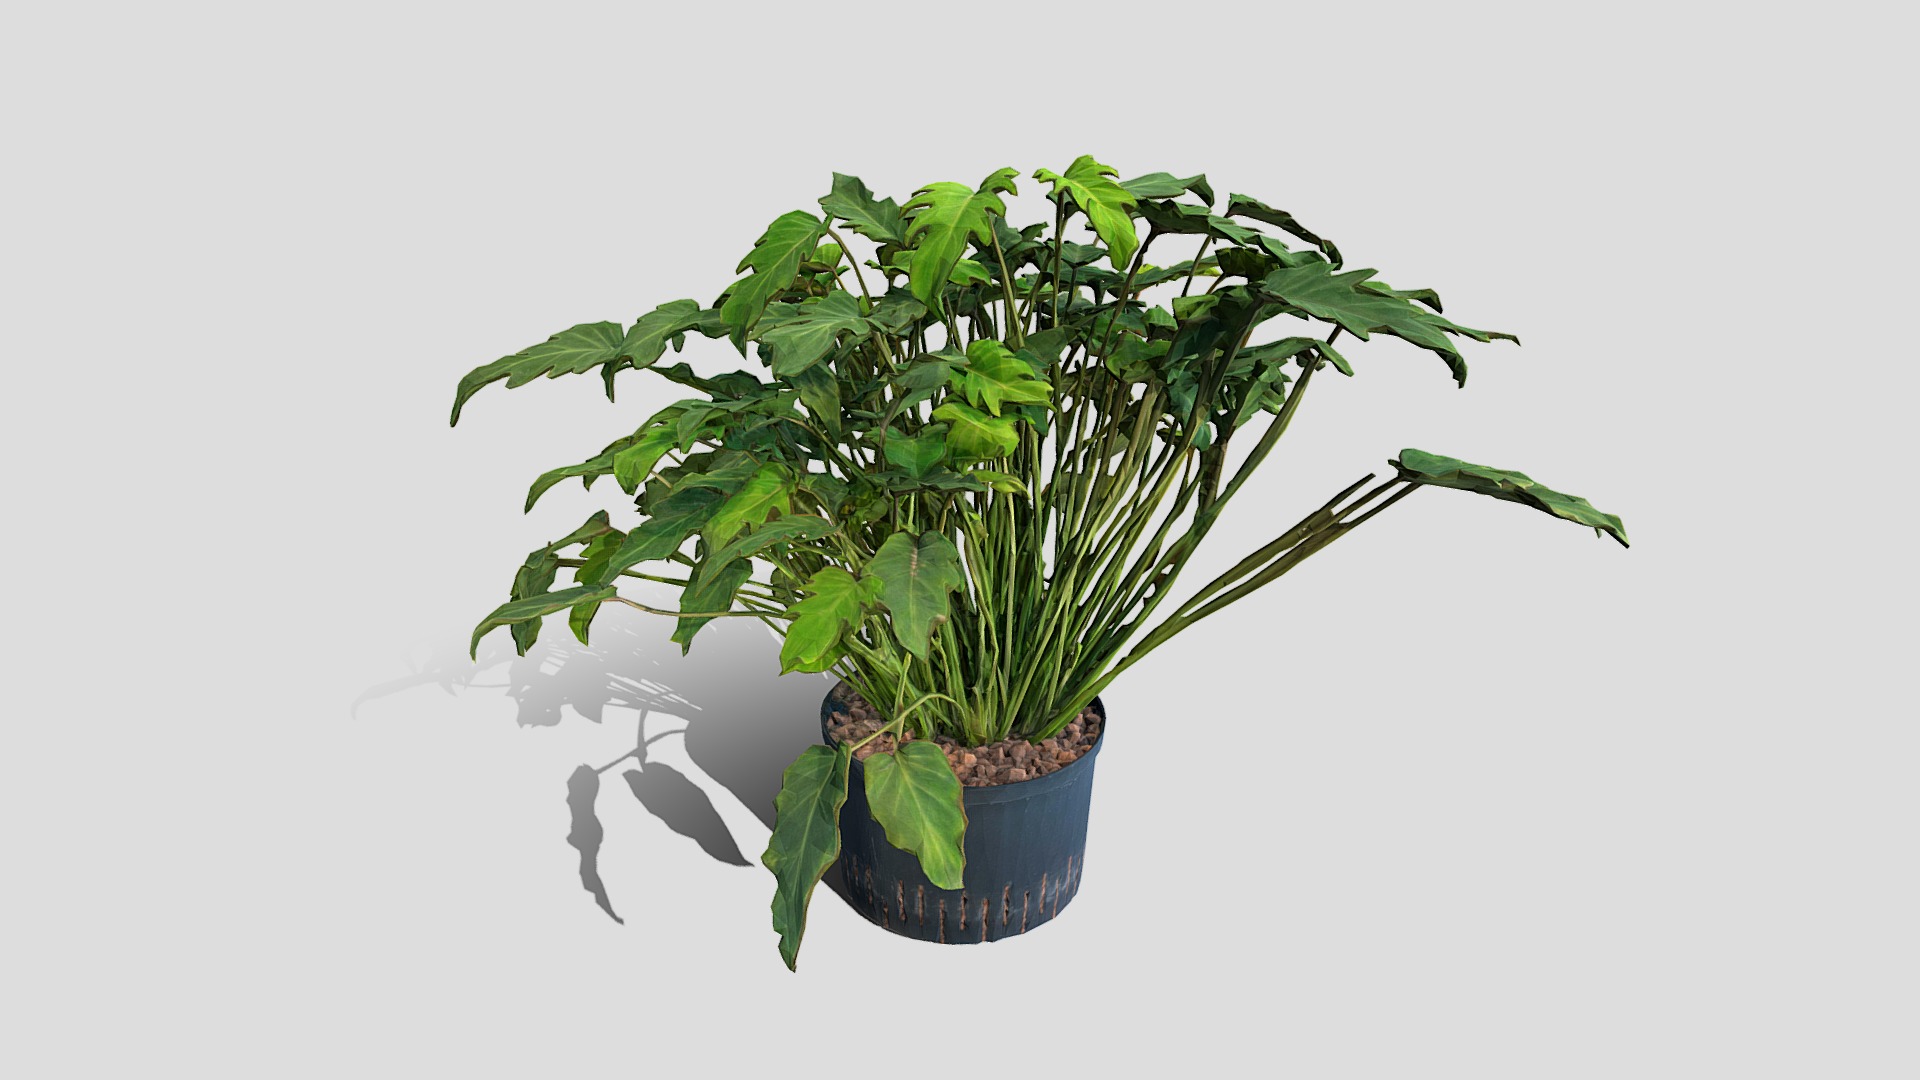 3D model 000023_Philodendron - This is a 3D model of the 000023_Philodendron. The 3D model is about a potted plant with green leaves.